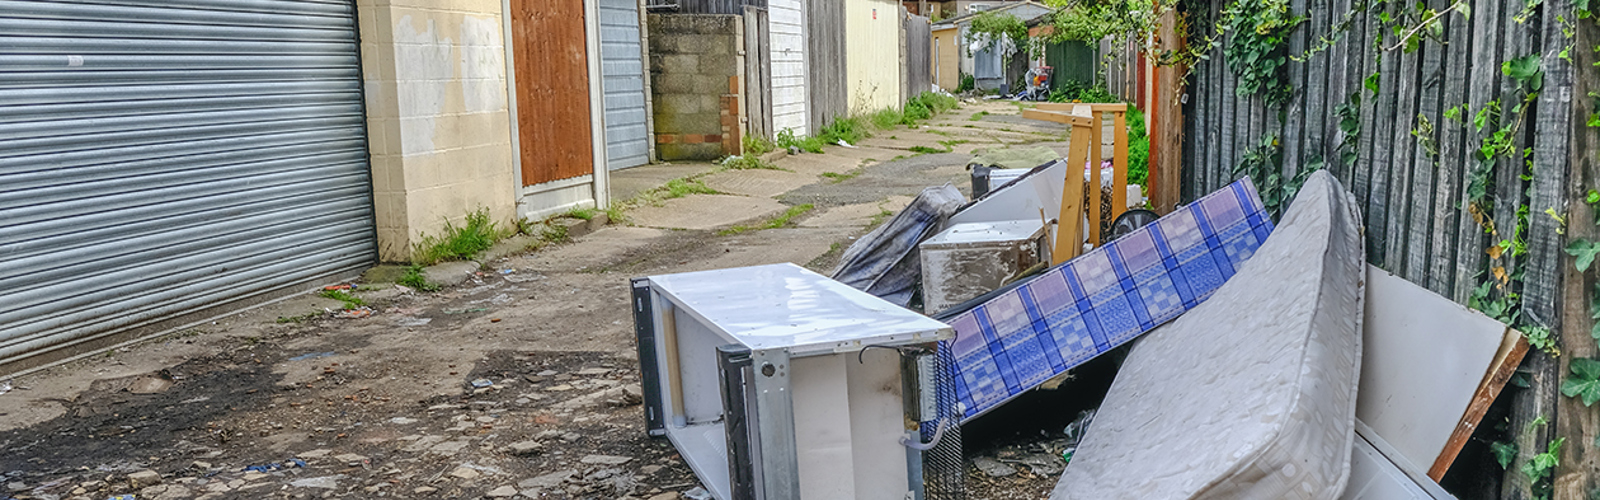 Household items discarded next to row of garages 